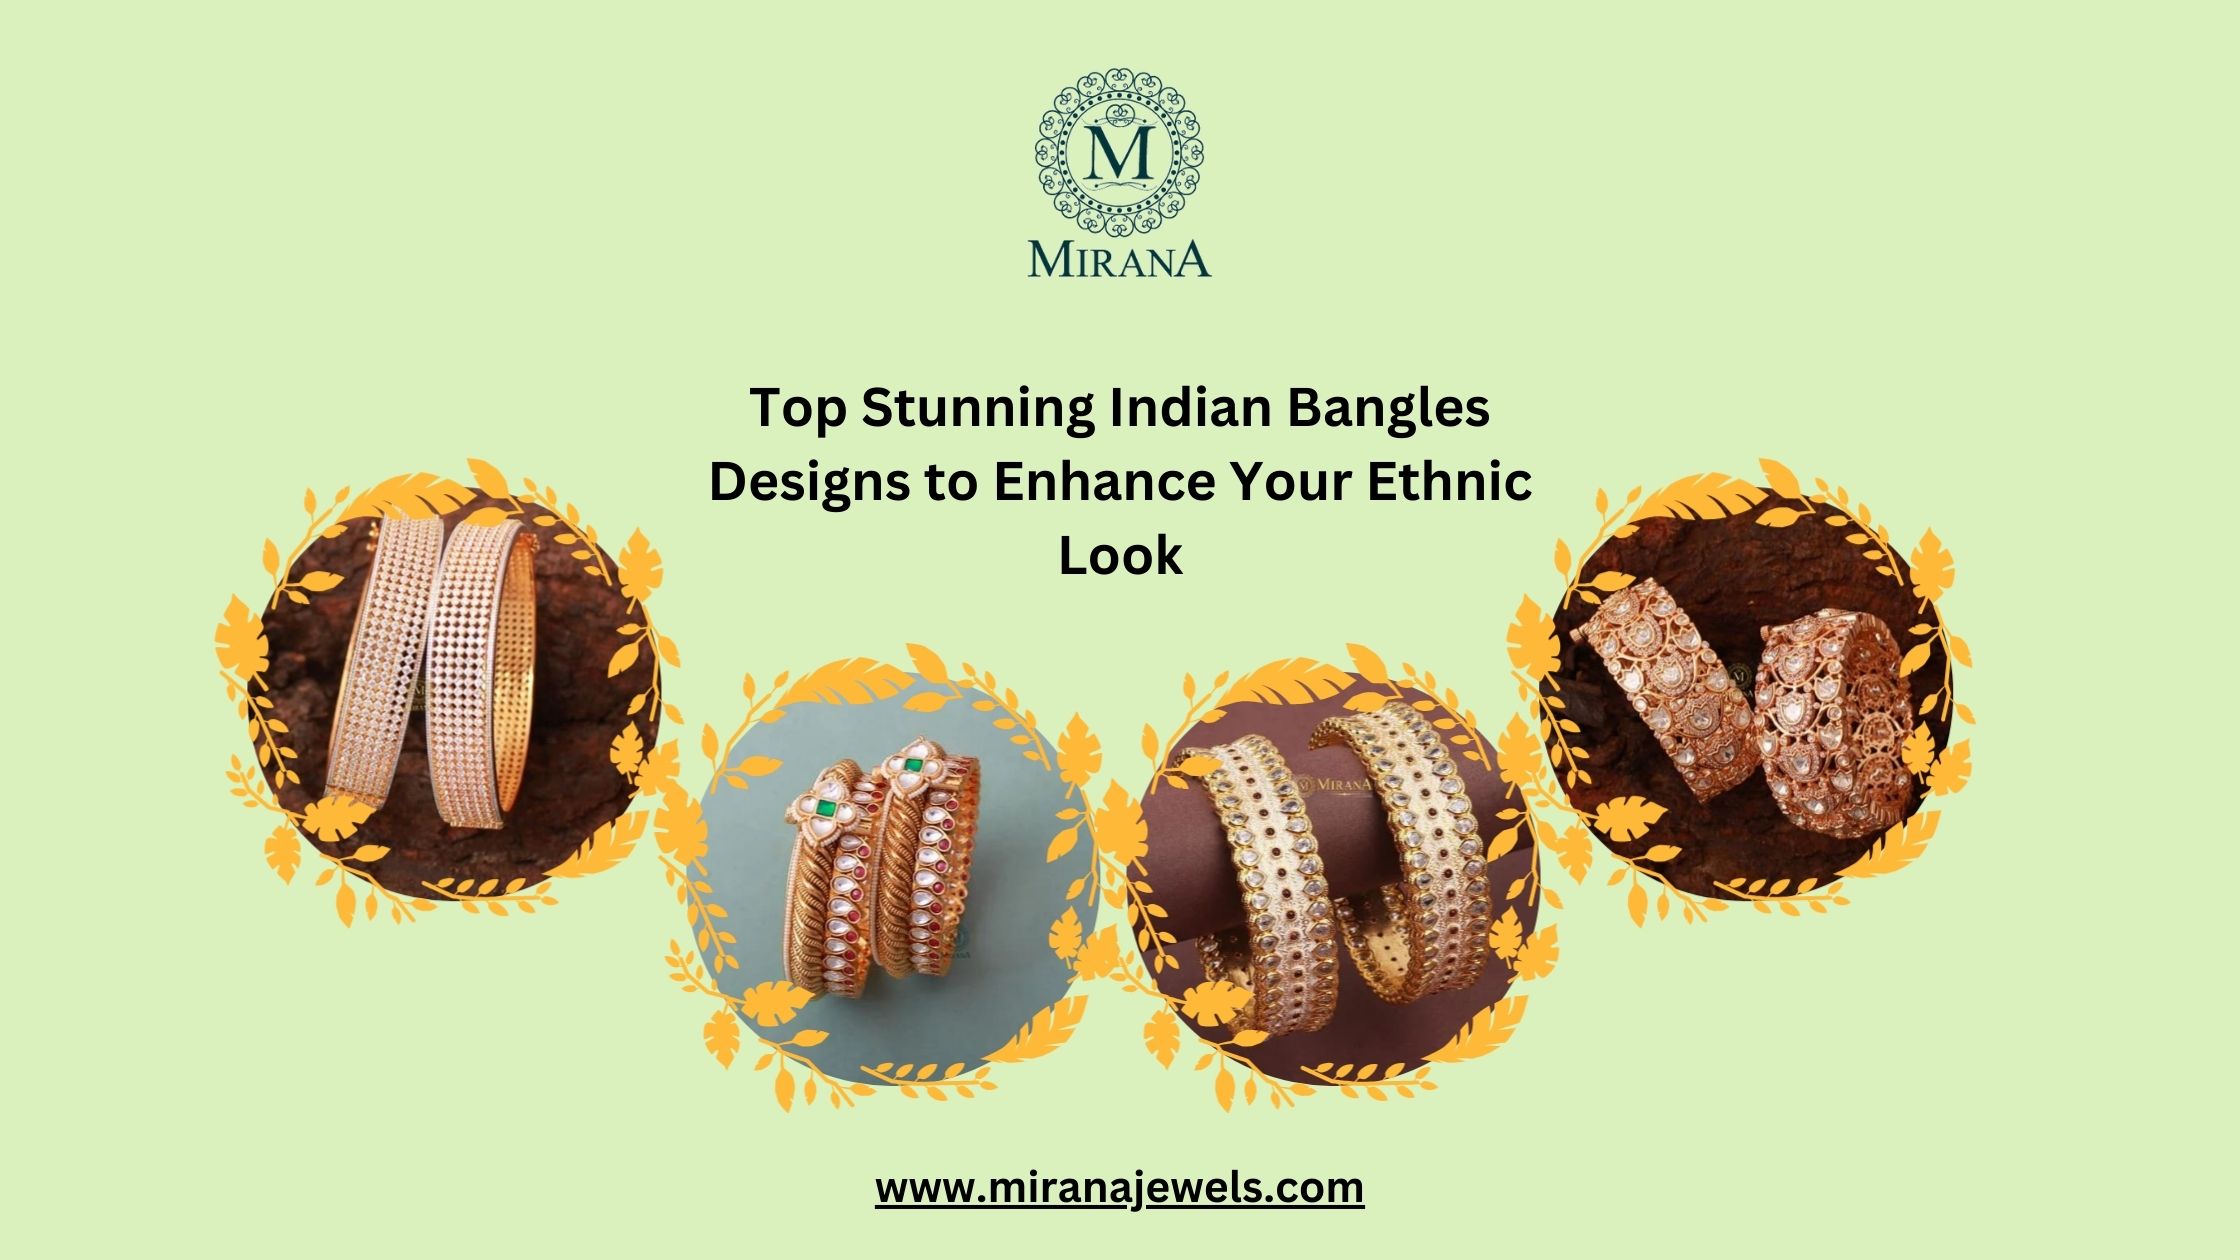 Top Stunning Indian Bangles Designs to Enhance Your Ethnic Look